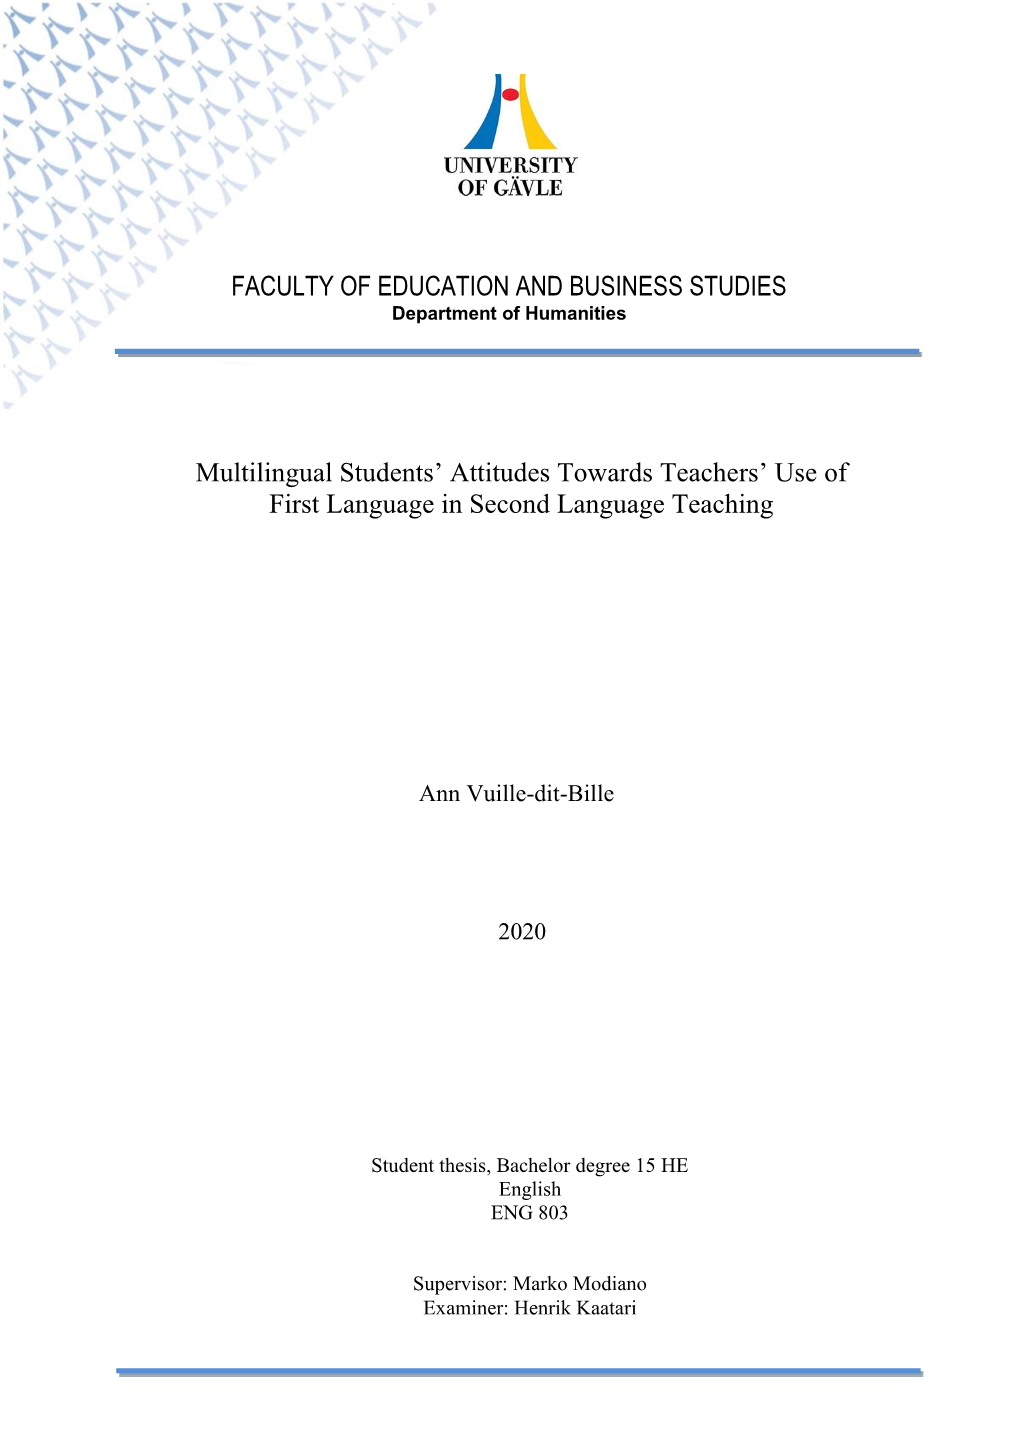 FACULTY of EDUCATION and BUSINESS STUDIES Multilingual Students' Attitudes Towards Teachers' Use of First Language in Second